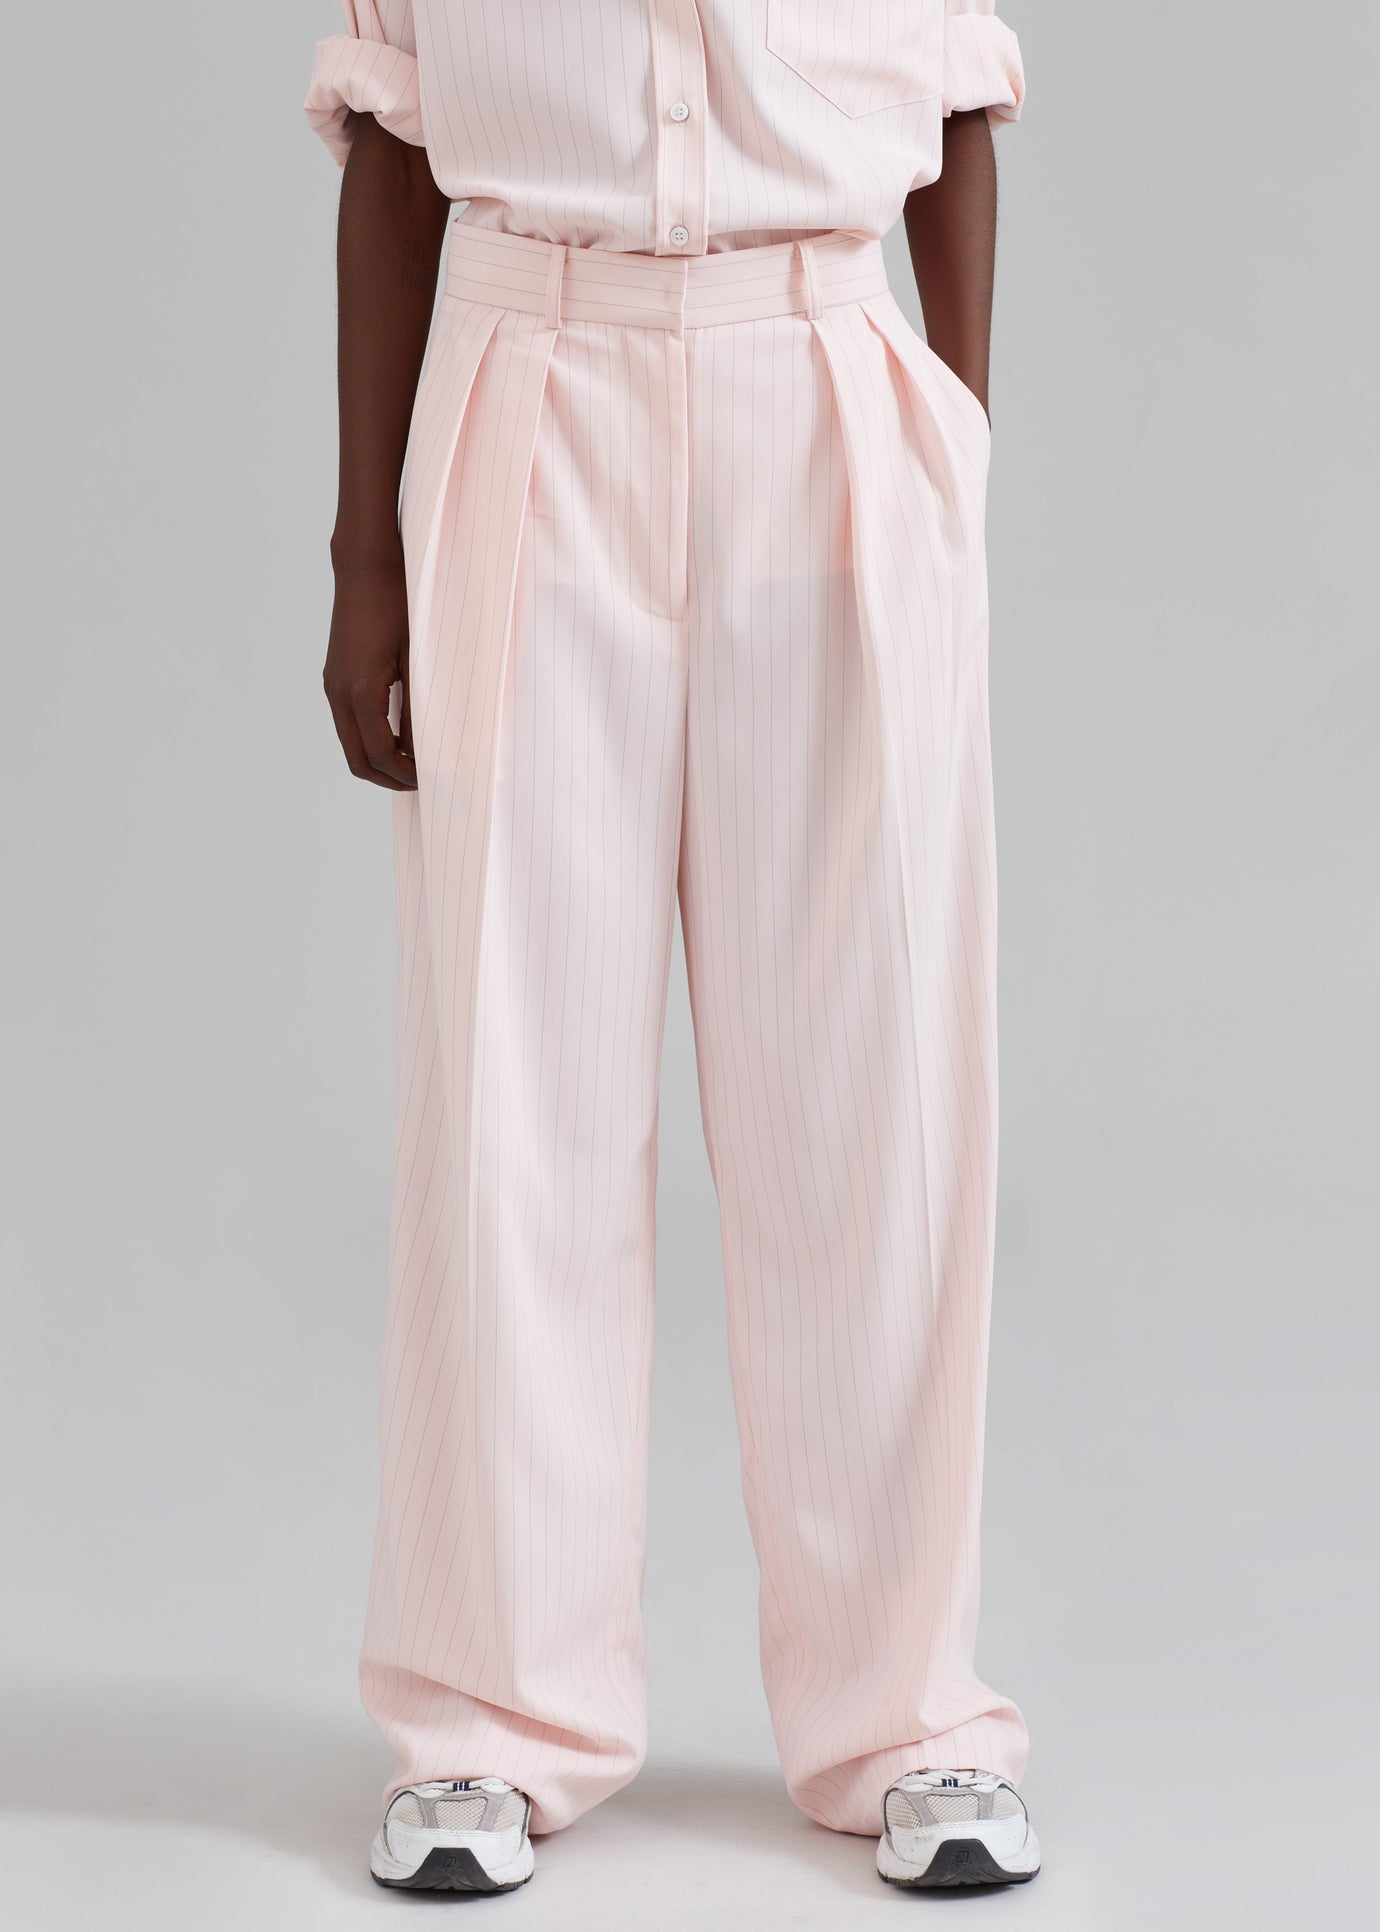 Tansy Fluid Pleated Trousers - Pink Pinstripe - 1